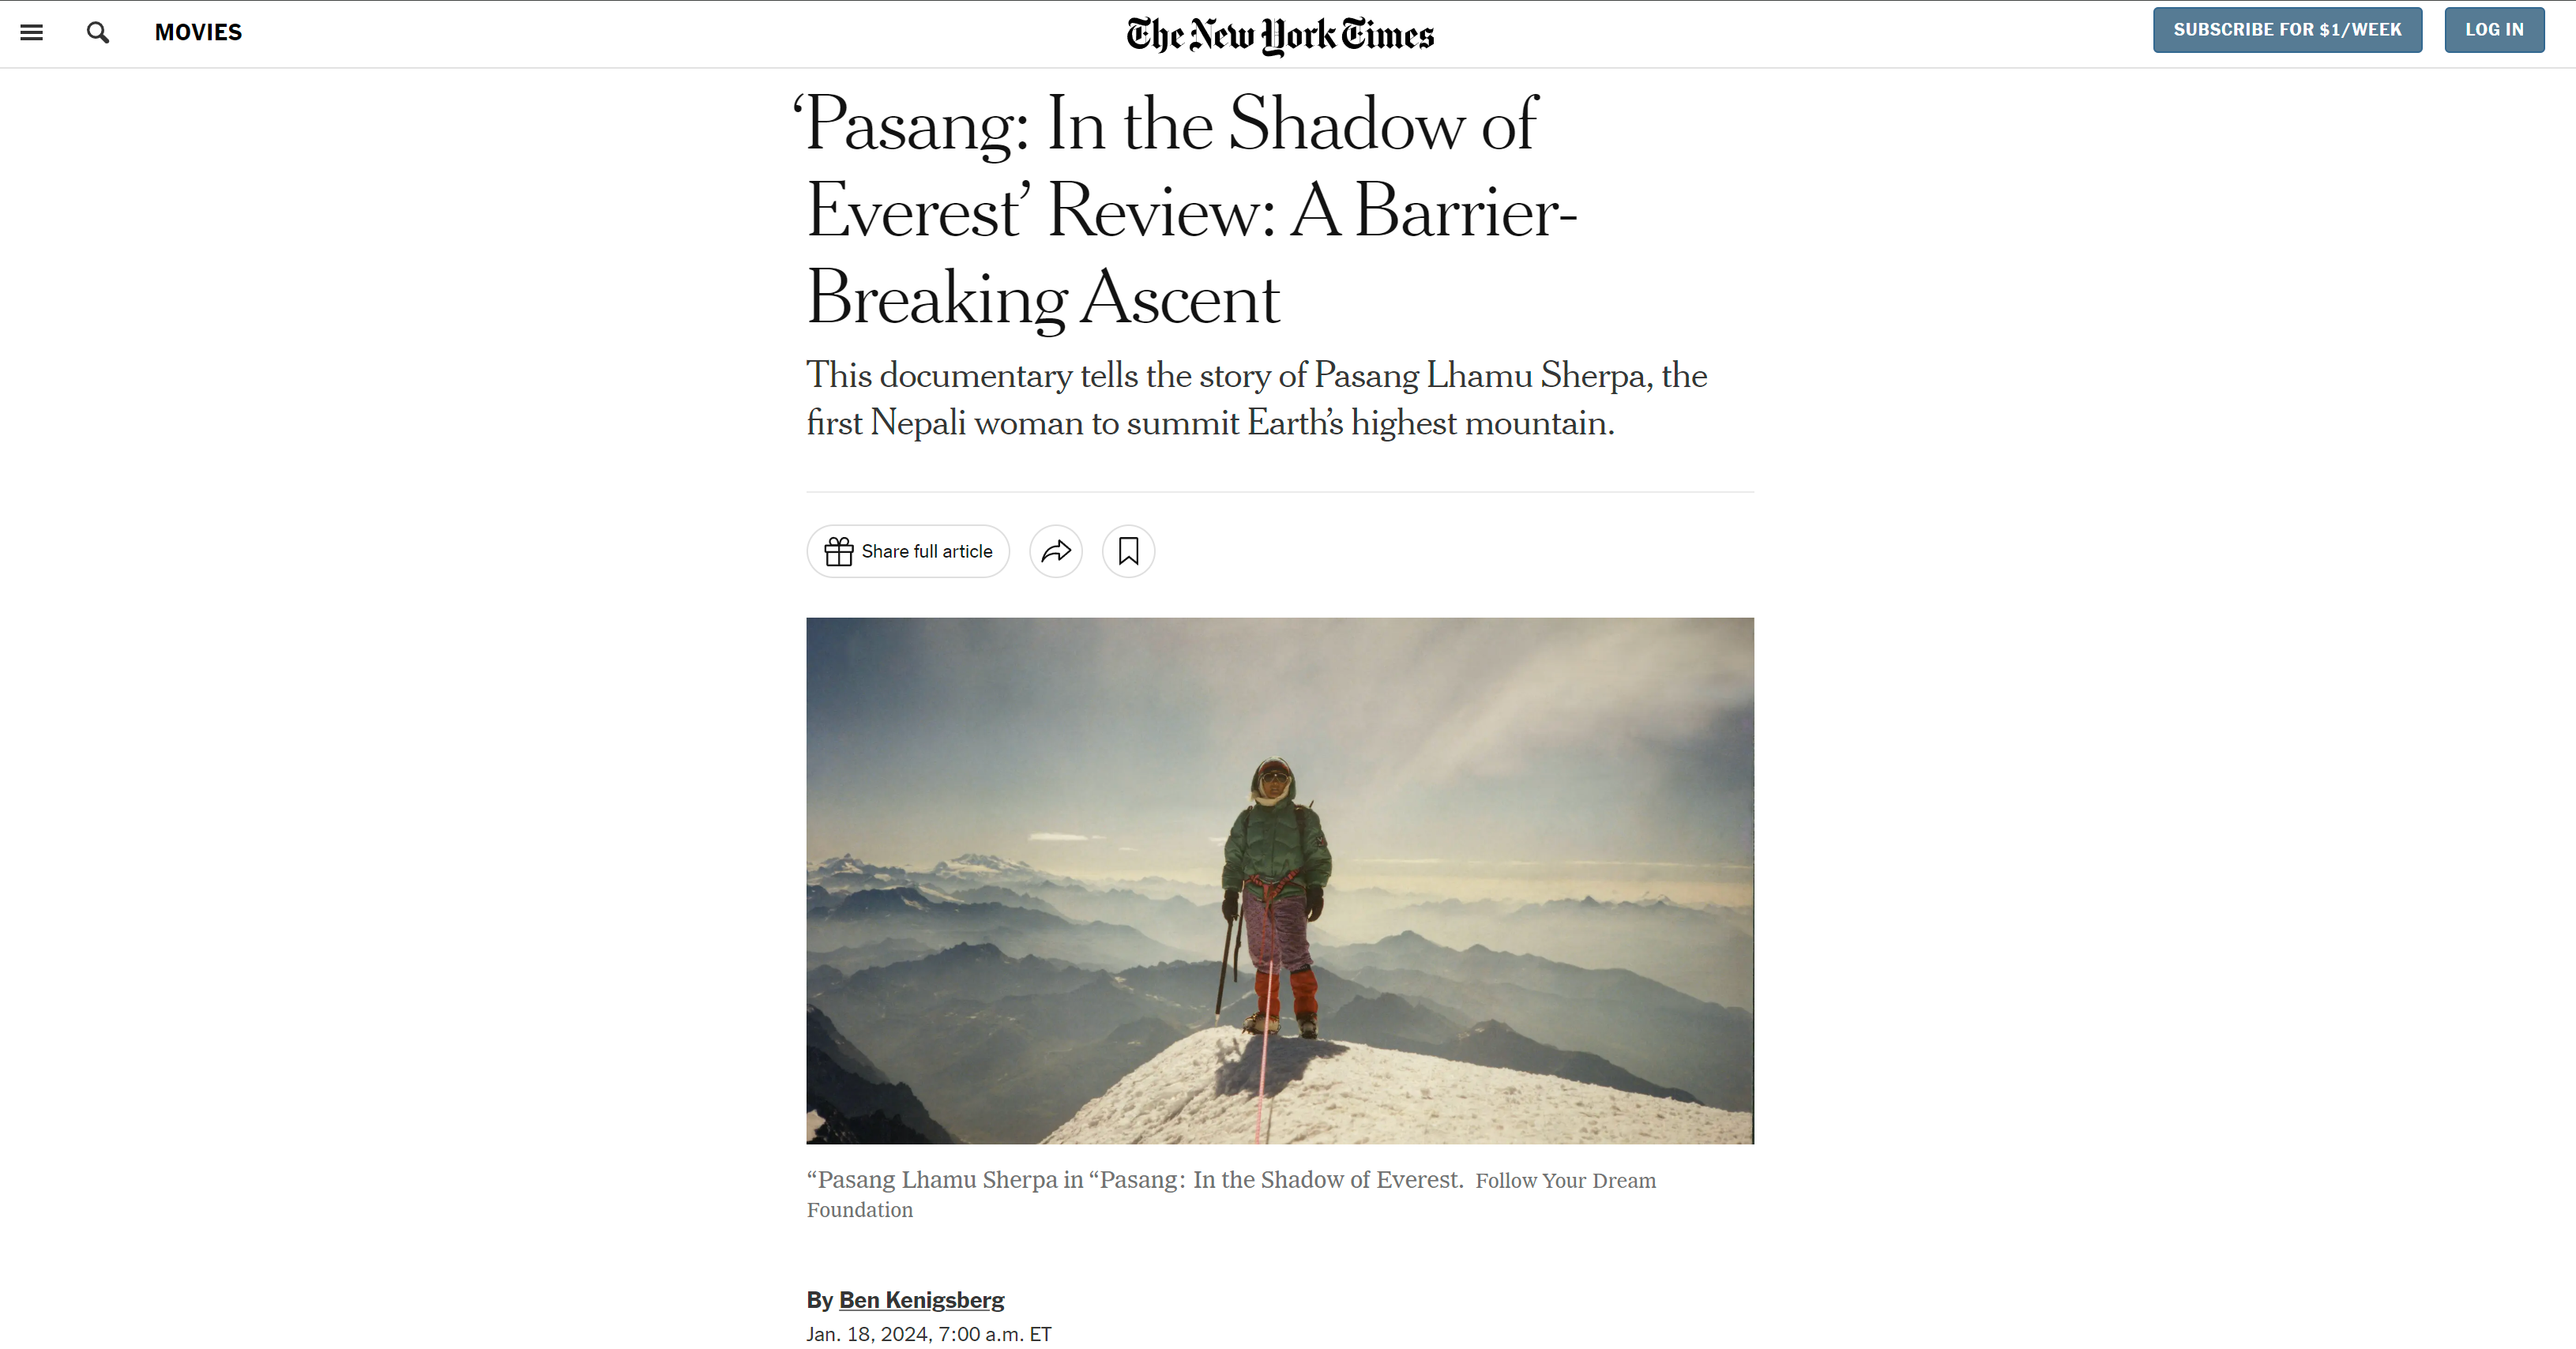 The New York Times published a review of PASANG on Jan 19, 2024